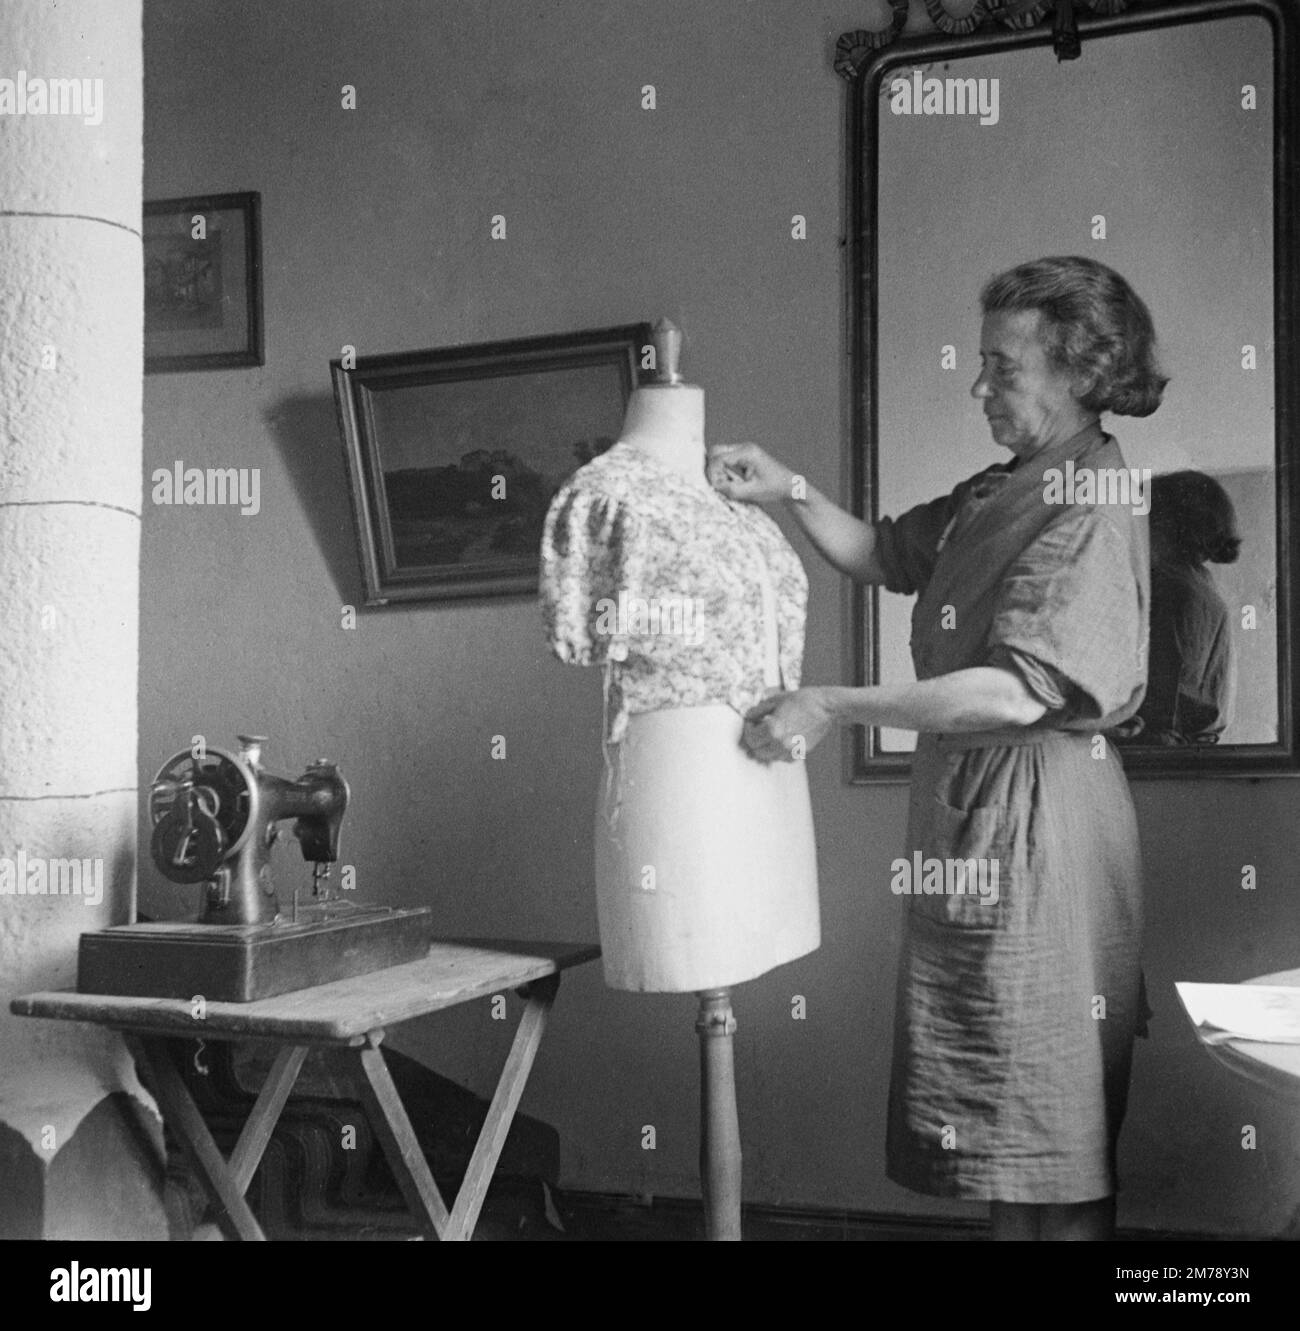 1940s Dressmaker, Tailoress or Seamstress and Mannequin or Dummy France 1943. Vintage black and white or monochrome photograph. Stock Photo